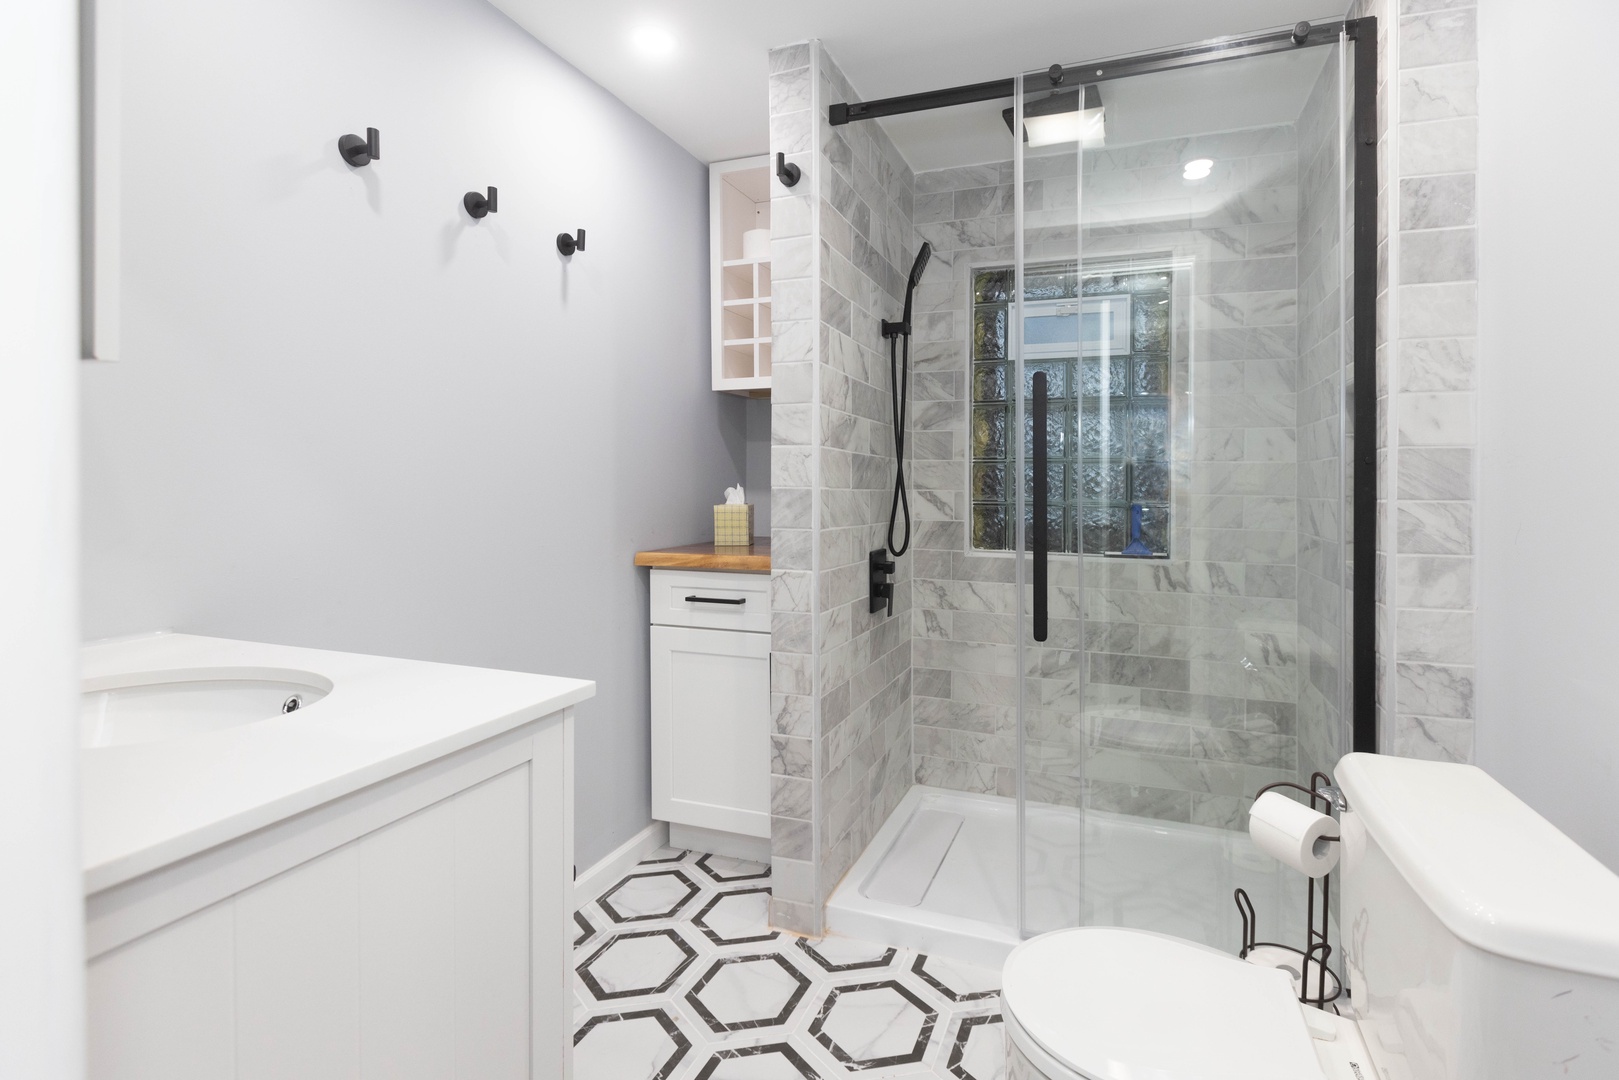 The apartment’s full bathroom offers a single vanity & glass shower